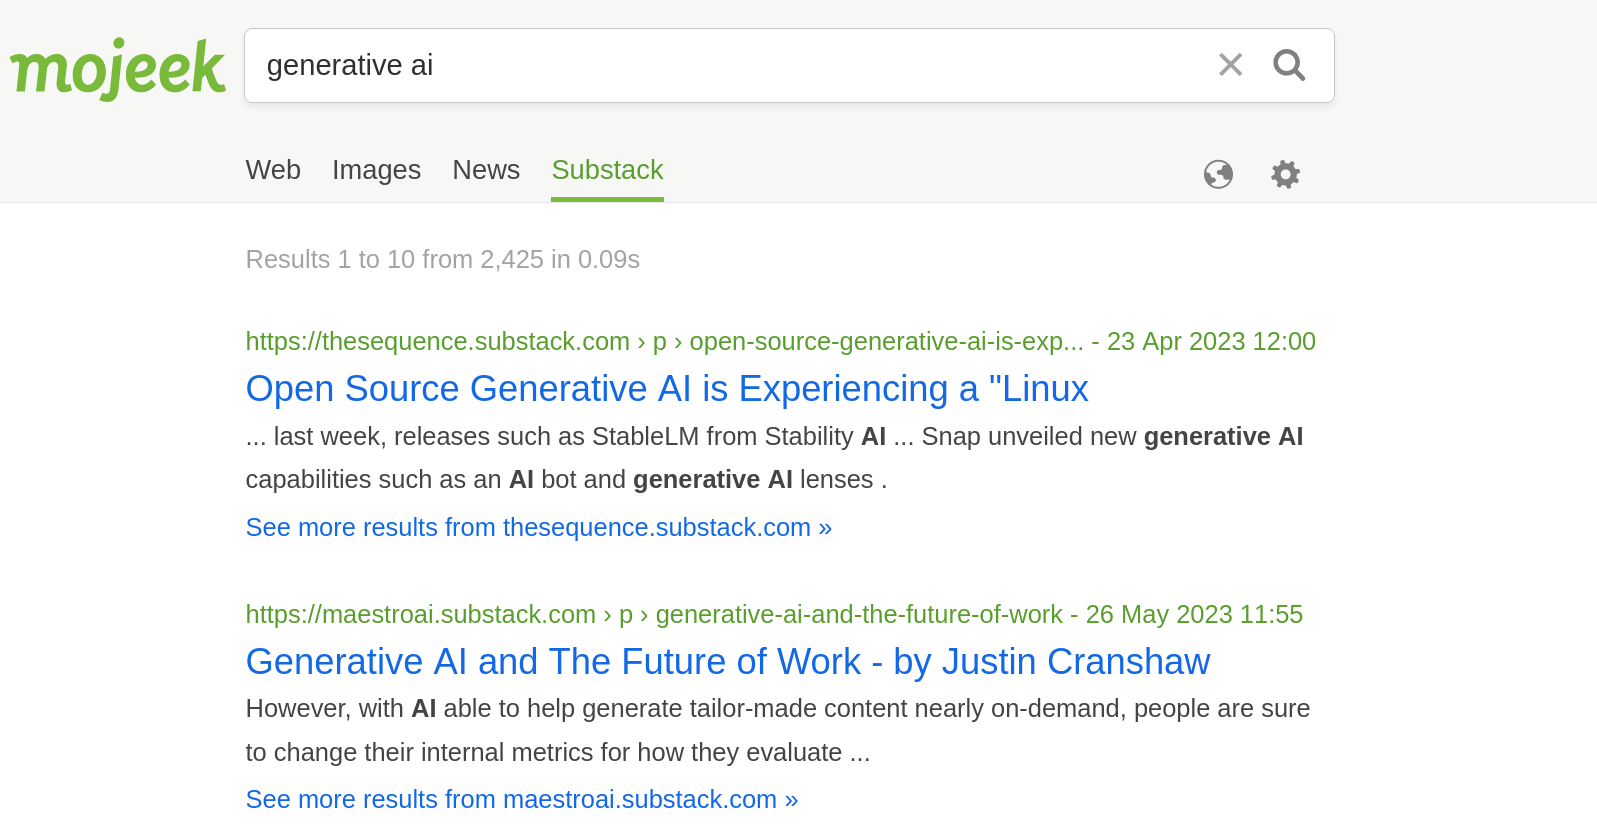 a search for Generative AI on Mojeek's new Substack search functionality